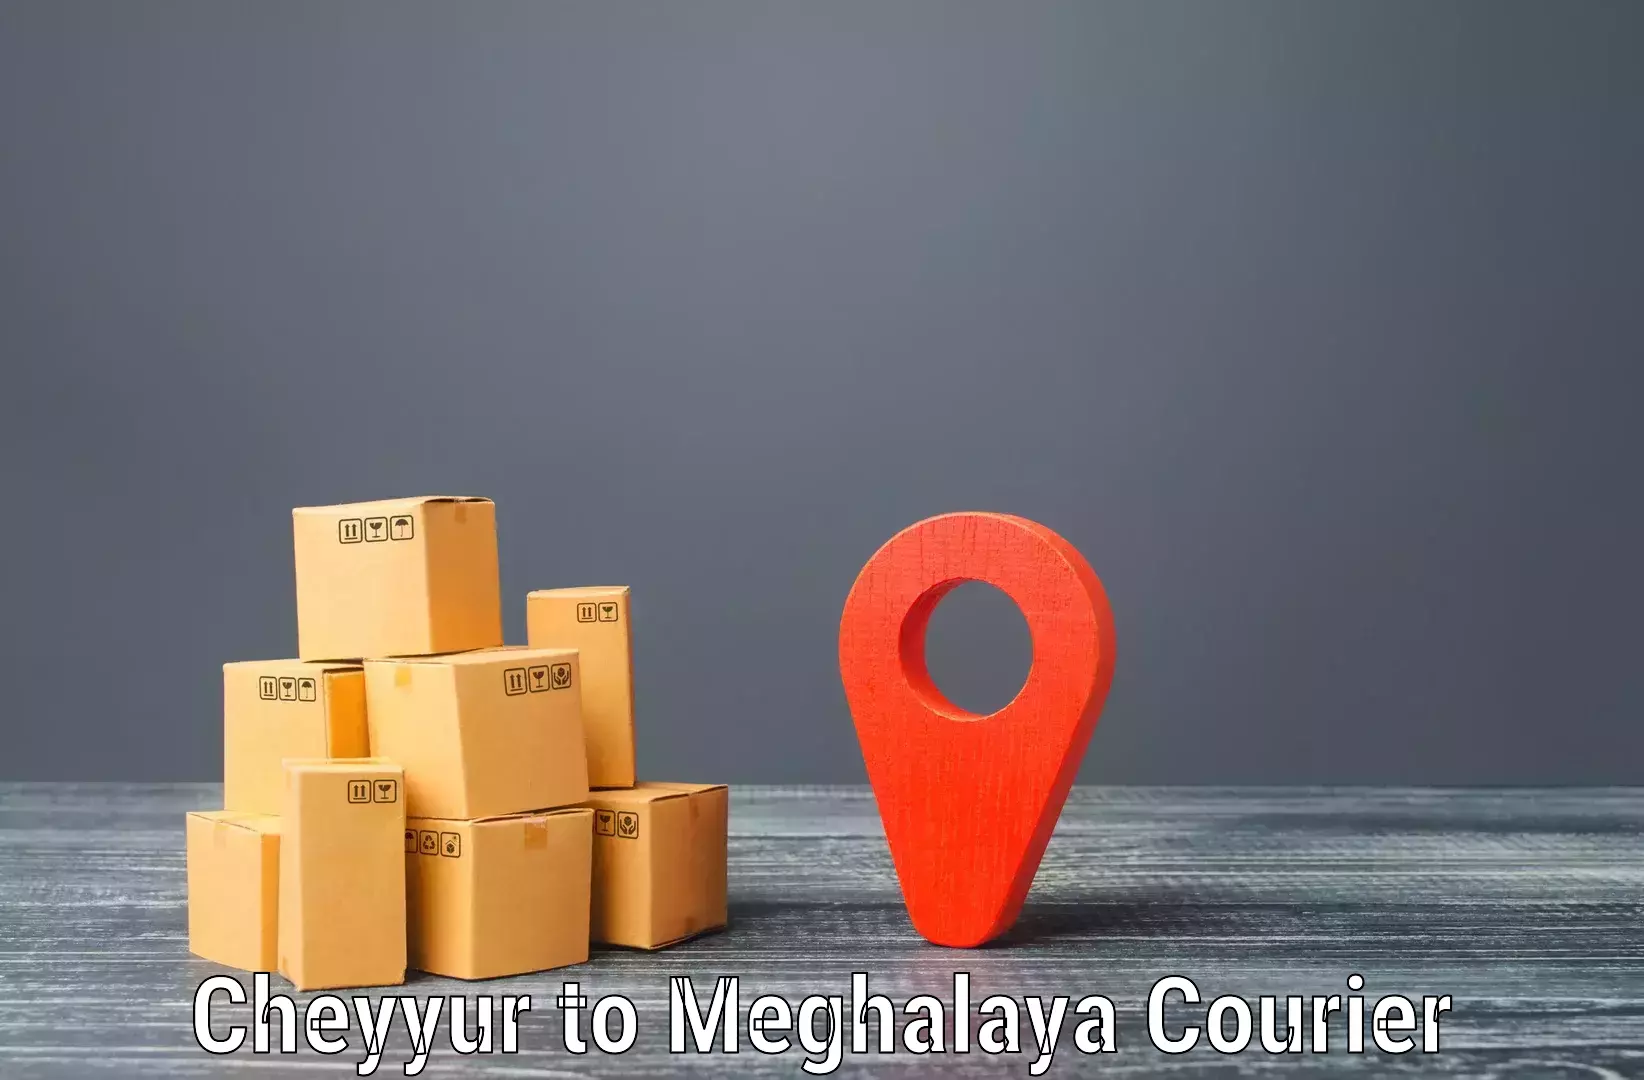 Global shipping networks Cheyyur to Nongstoin